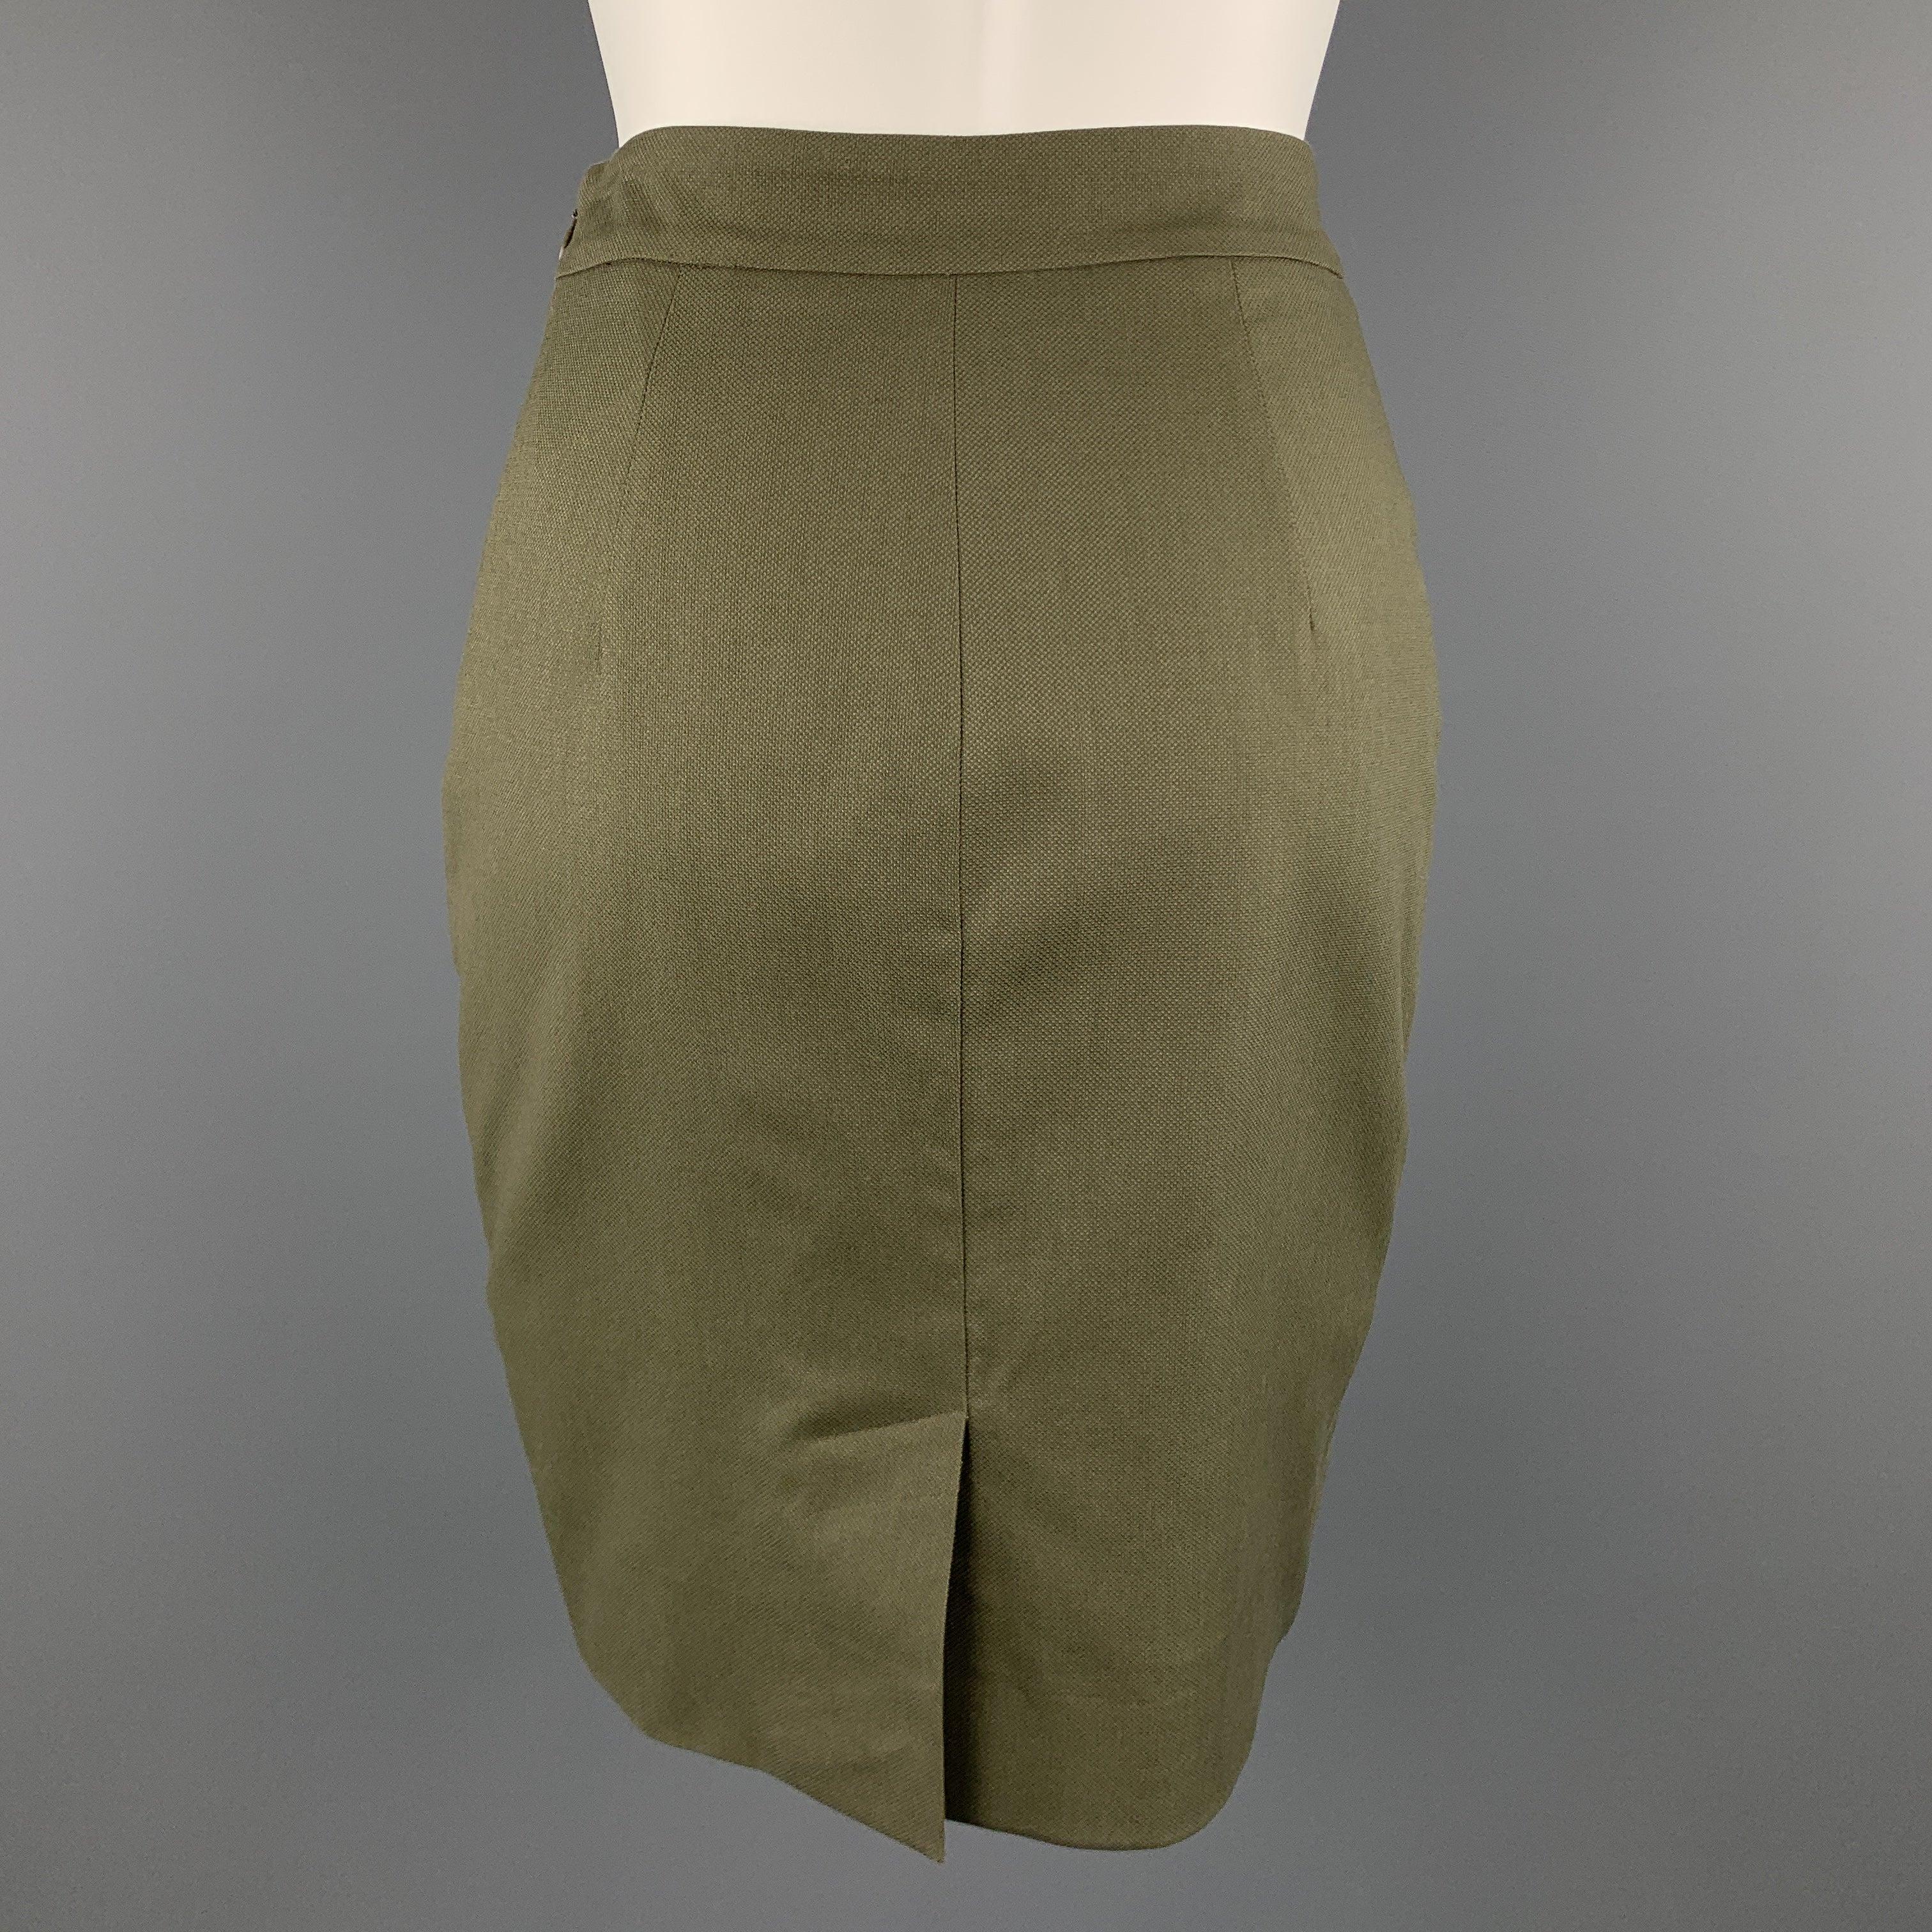 GIVENCHY Size 4 Olive Cotton Blend Canvas Pencil Skirt In Good Condition For Sale In San Francisco, CA